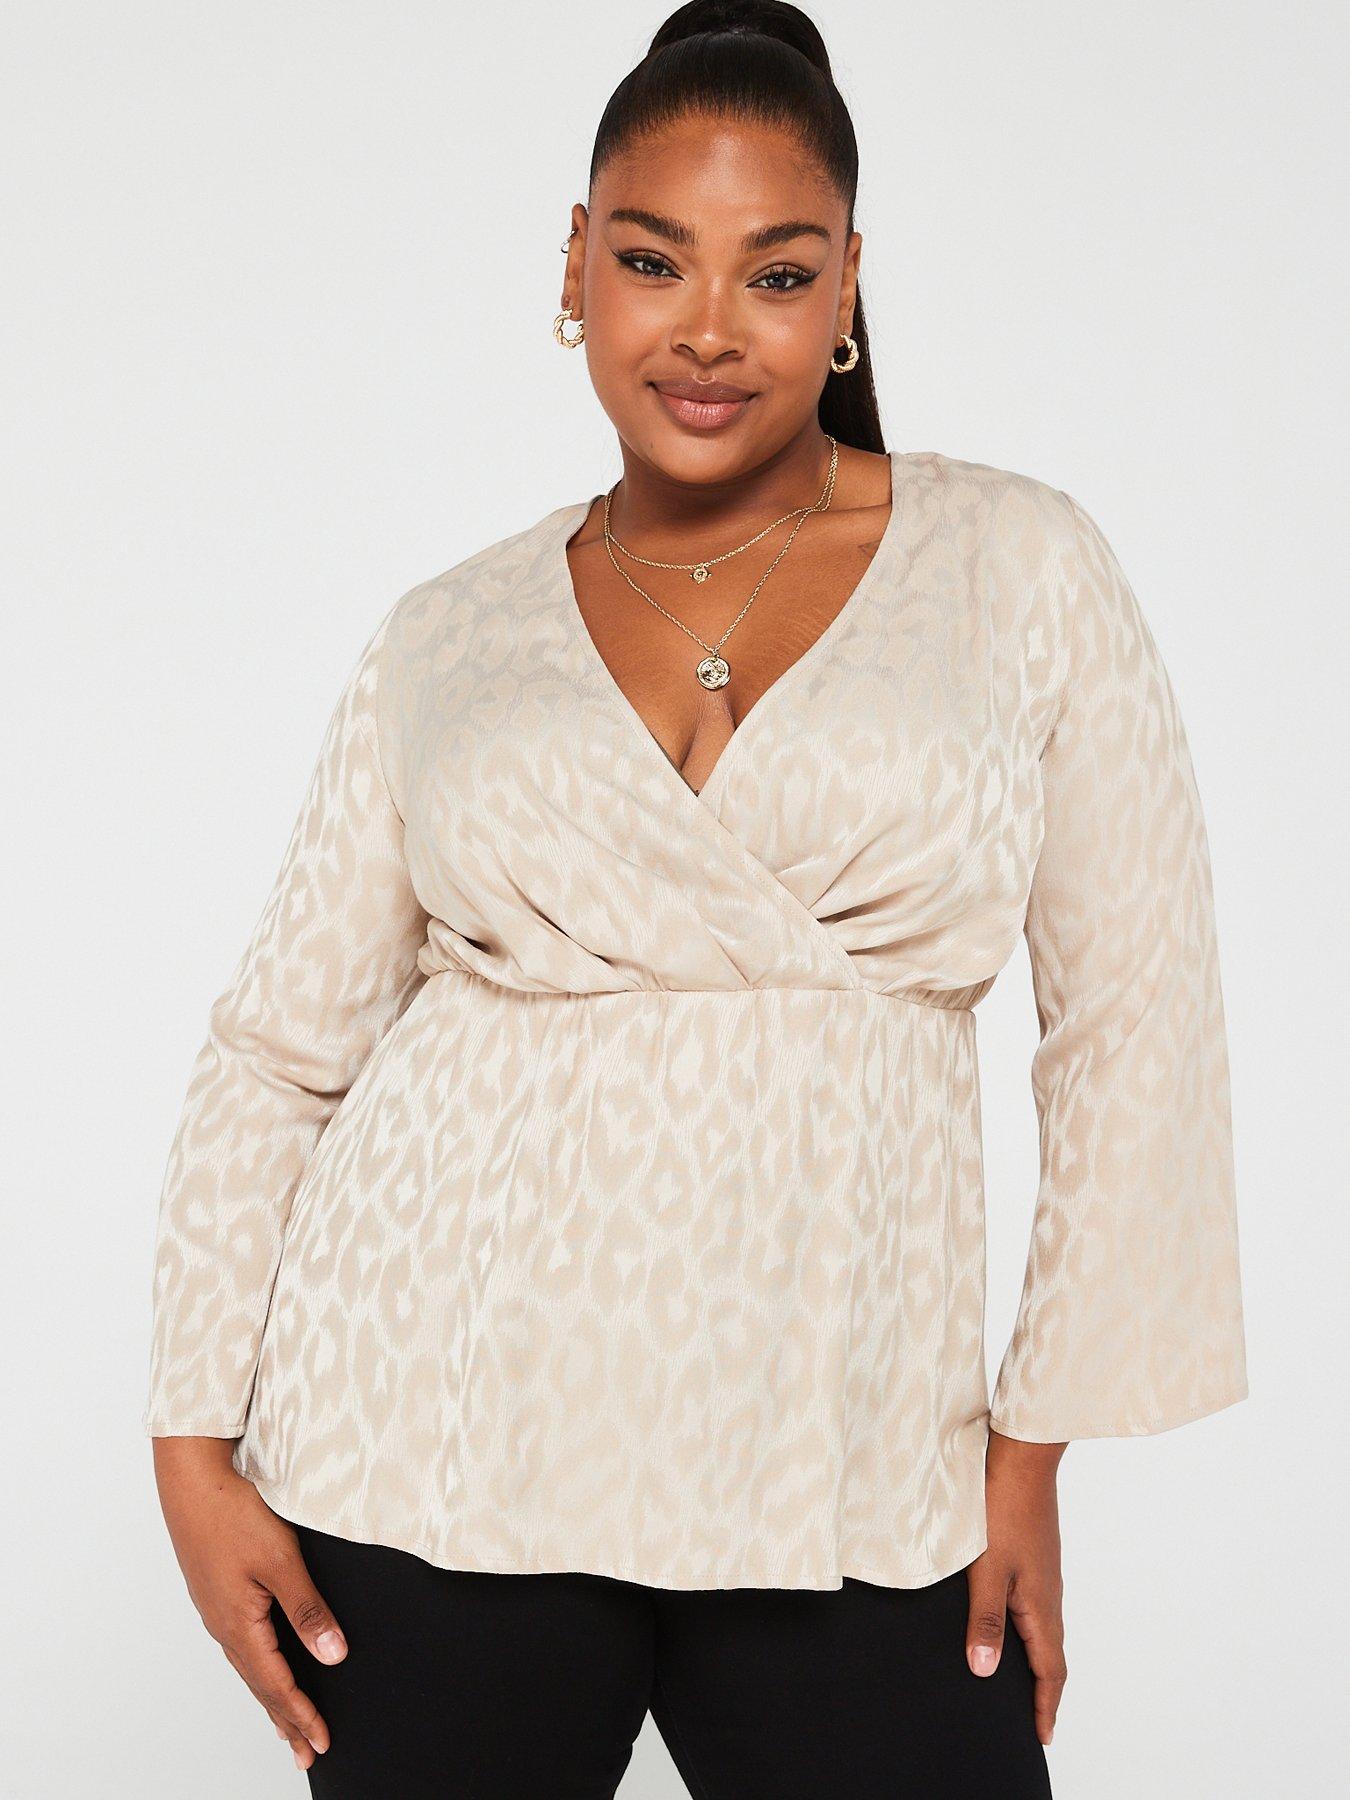 Women's Clearance Shirts Curve Tops